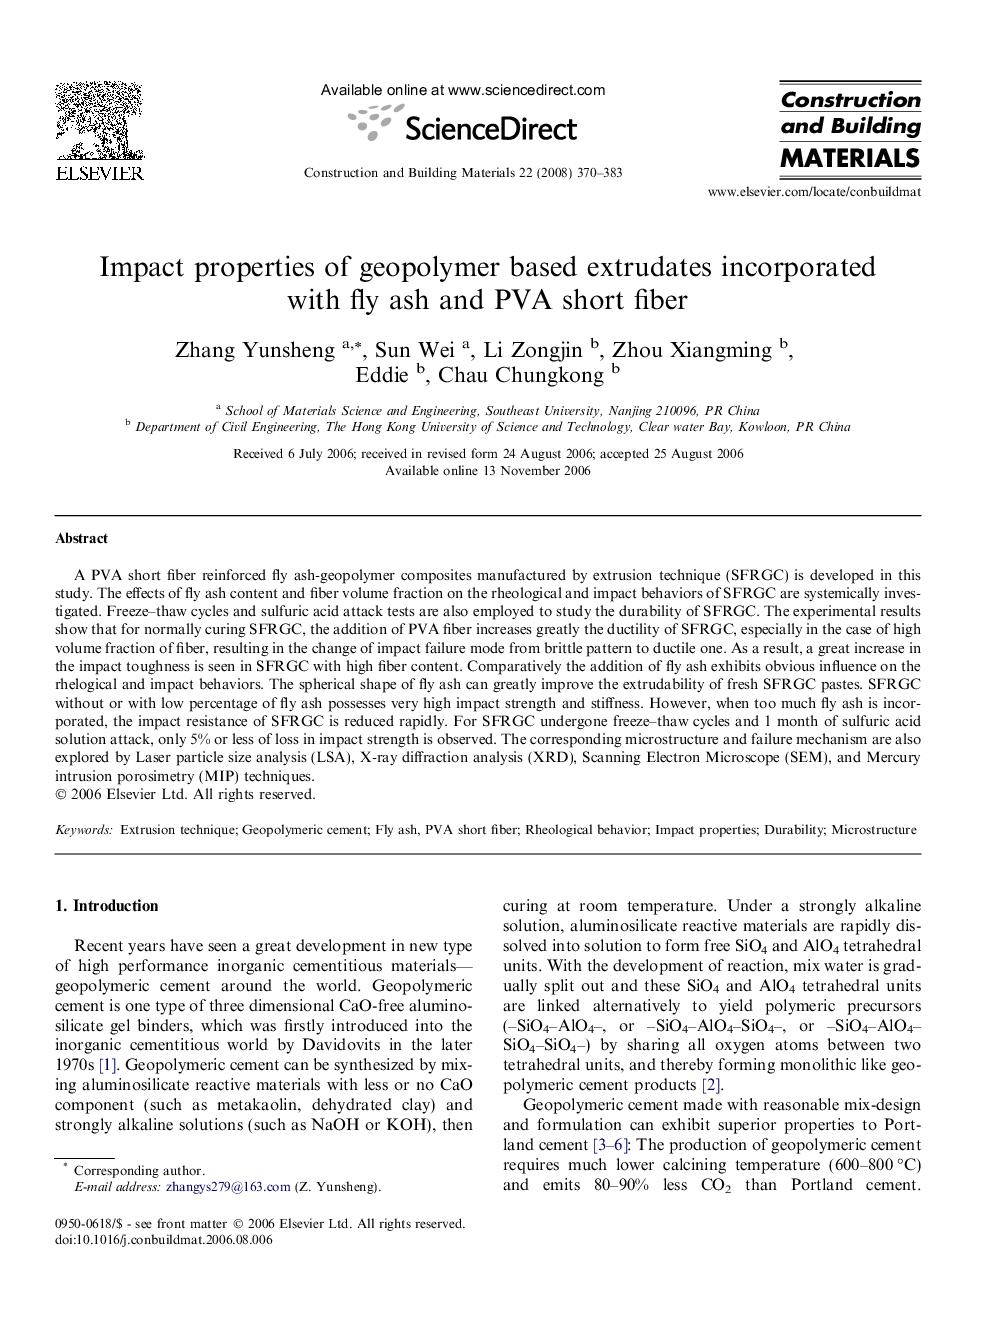 Impact properties of geopolymer based extrudates incorporated with fly ash and PVA short fiber